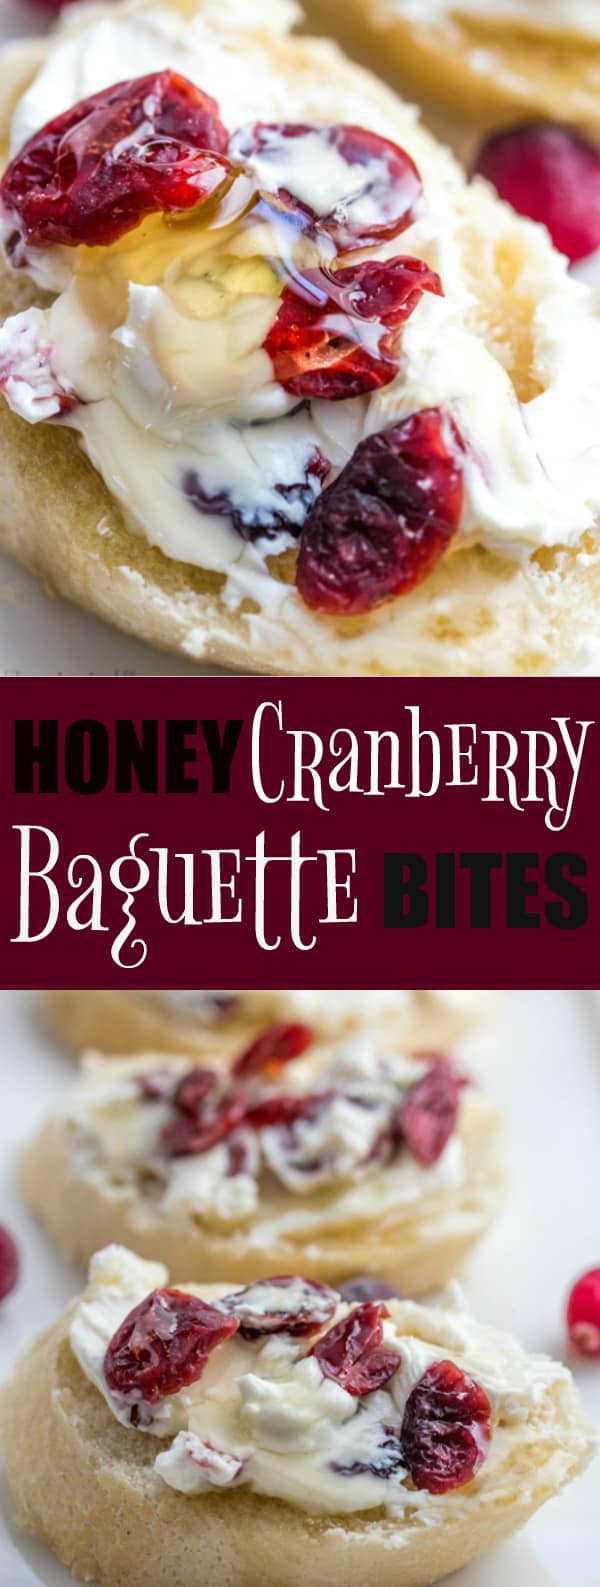 Honey Cranberry Baguette Bites Pinterest image with text in center